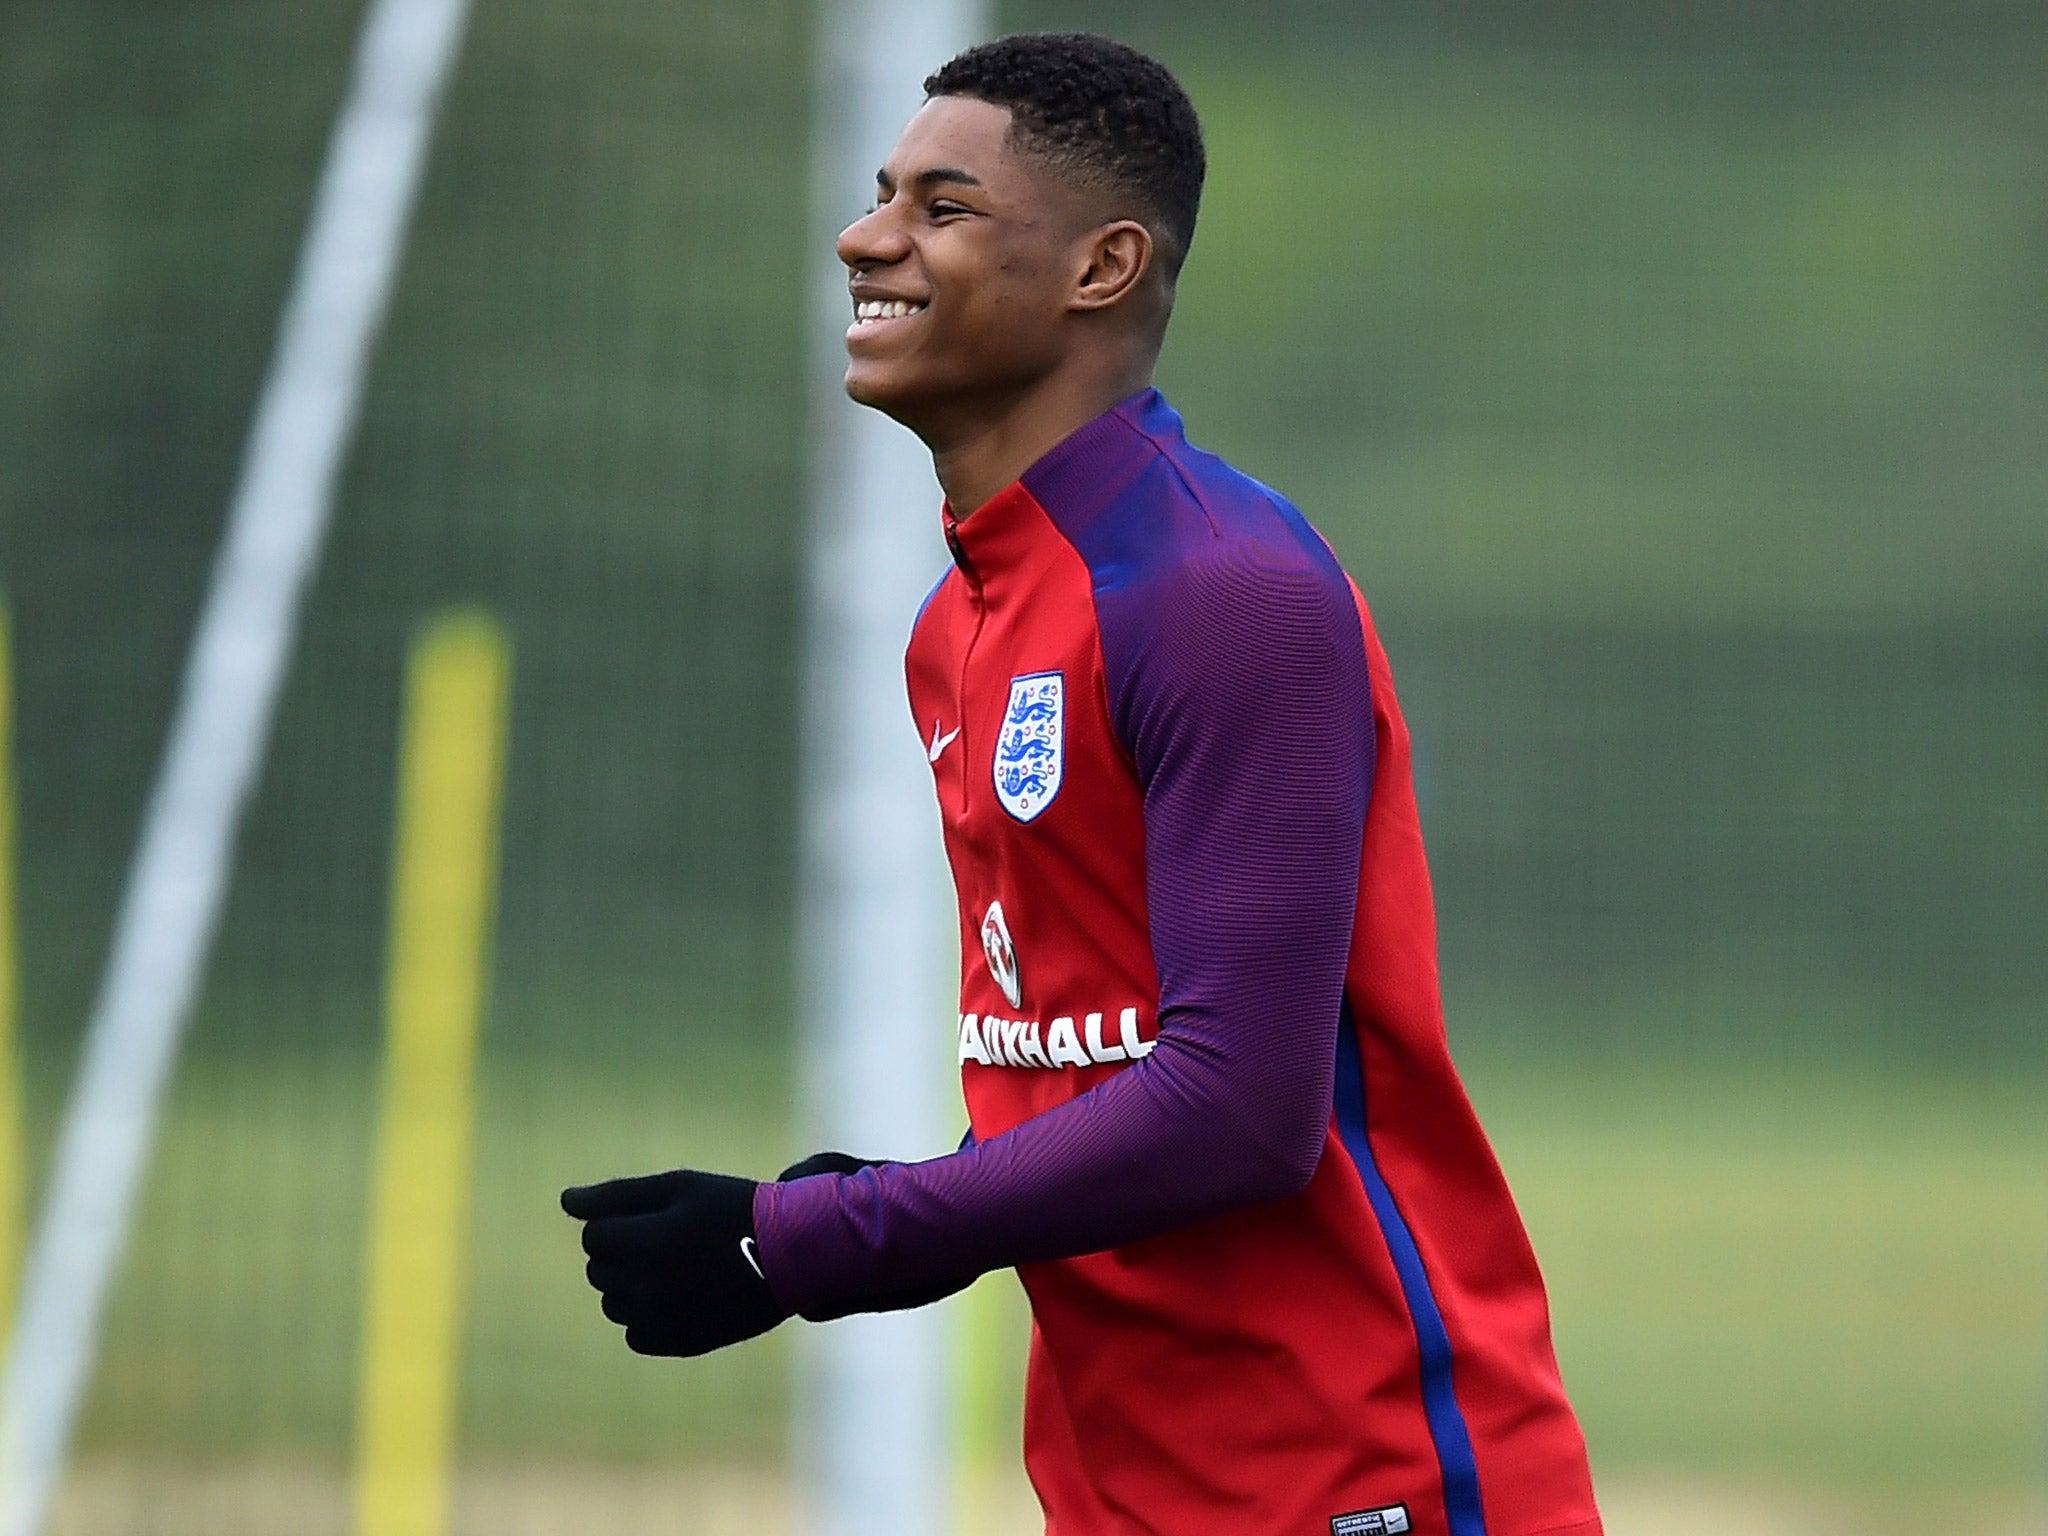 Marcus Rashford will be the youngest player at Euro 2016